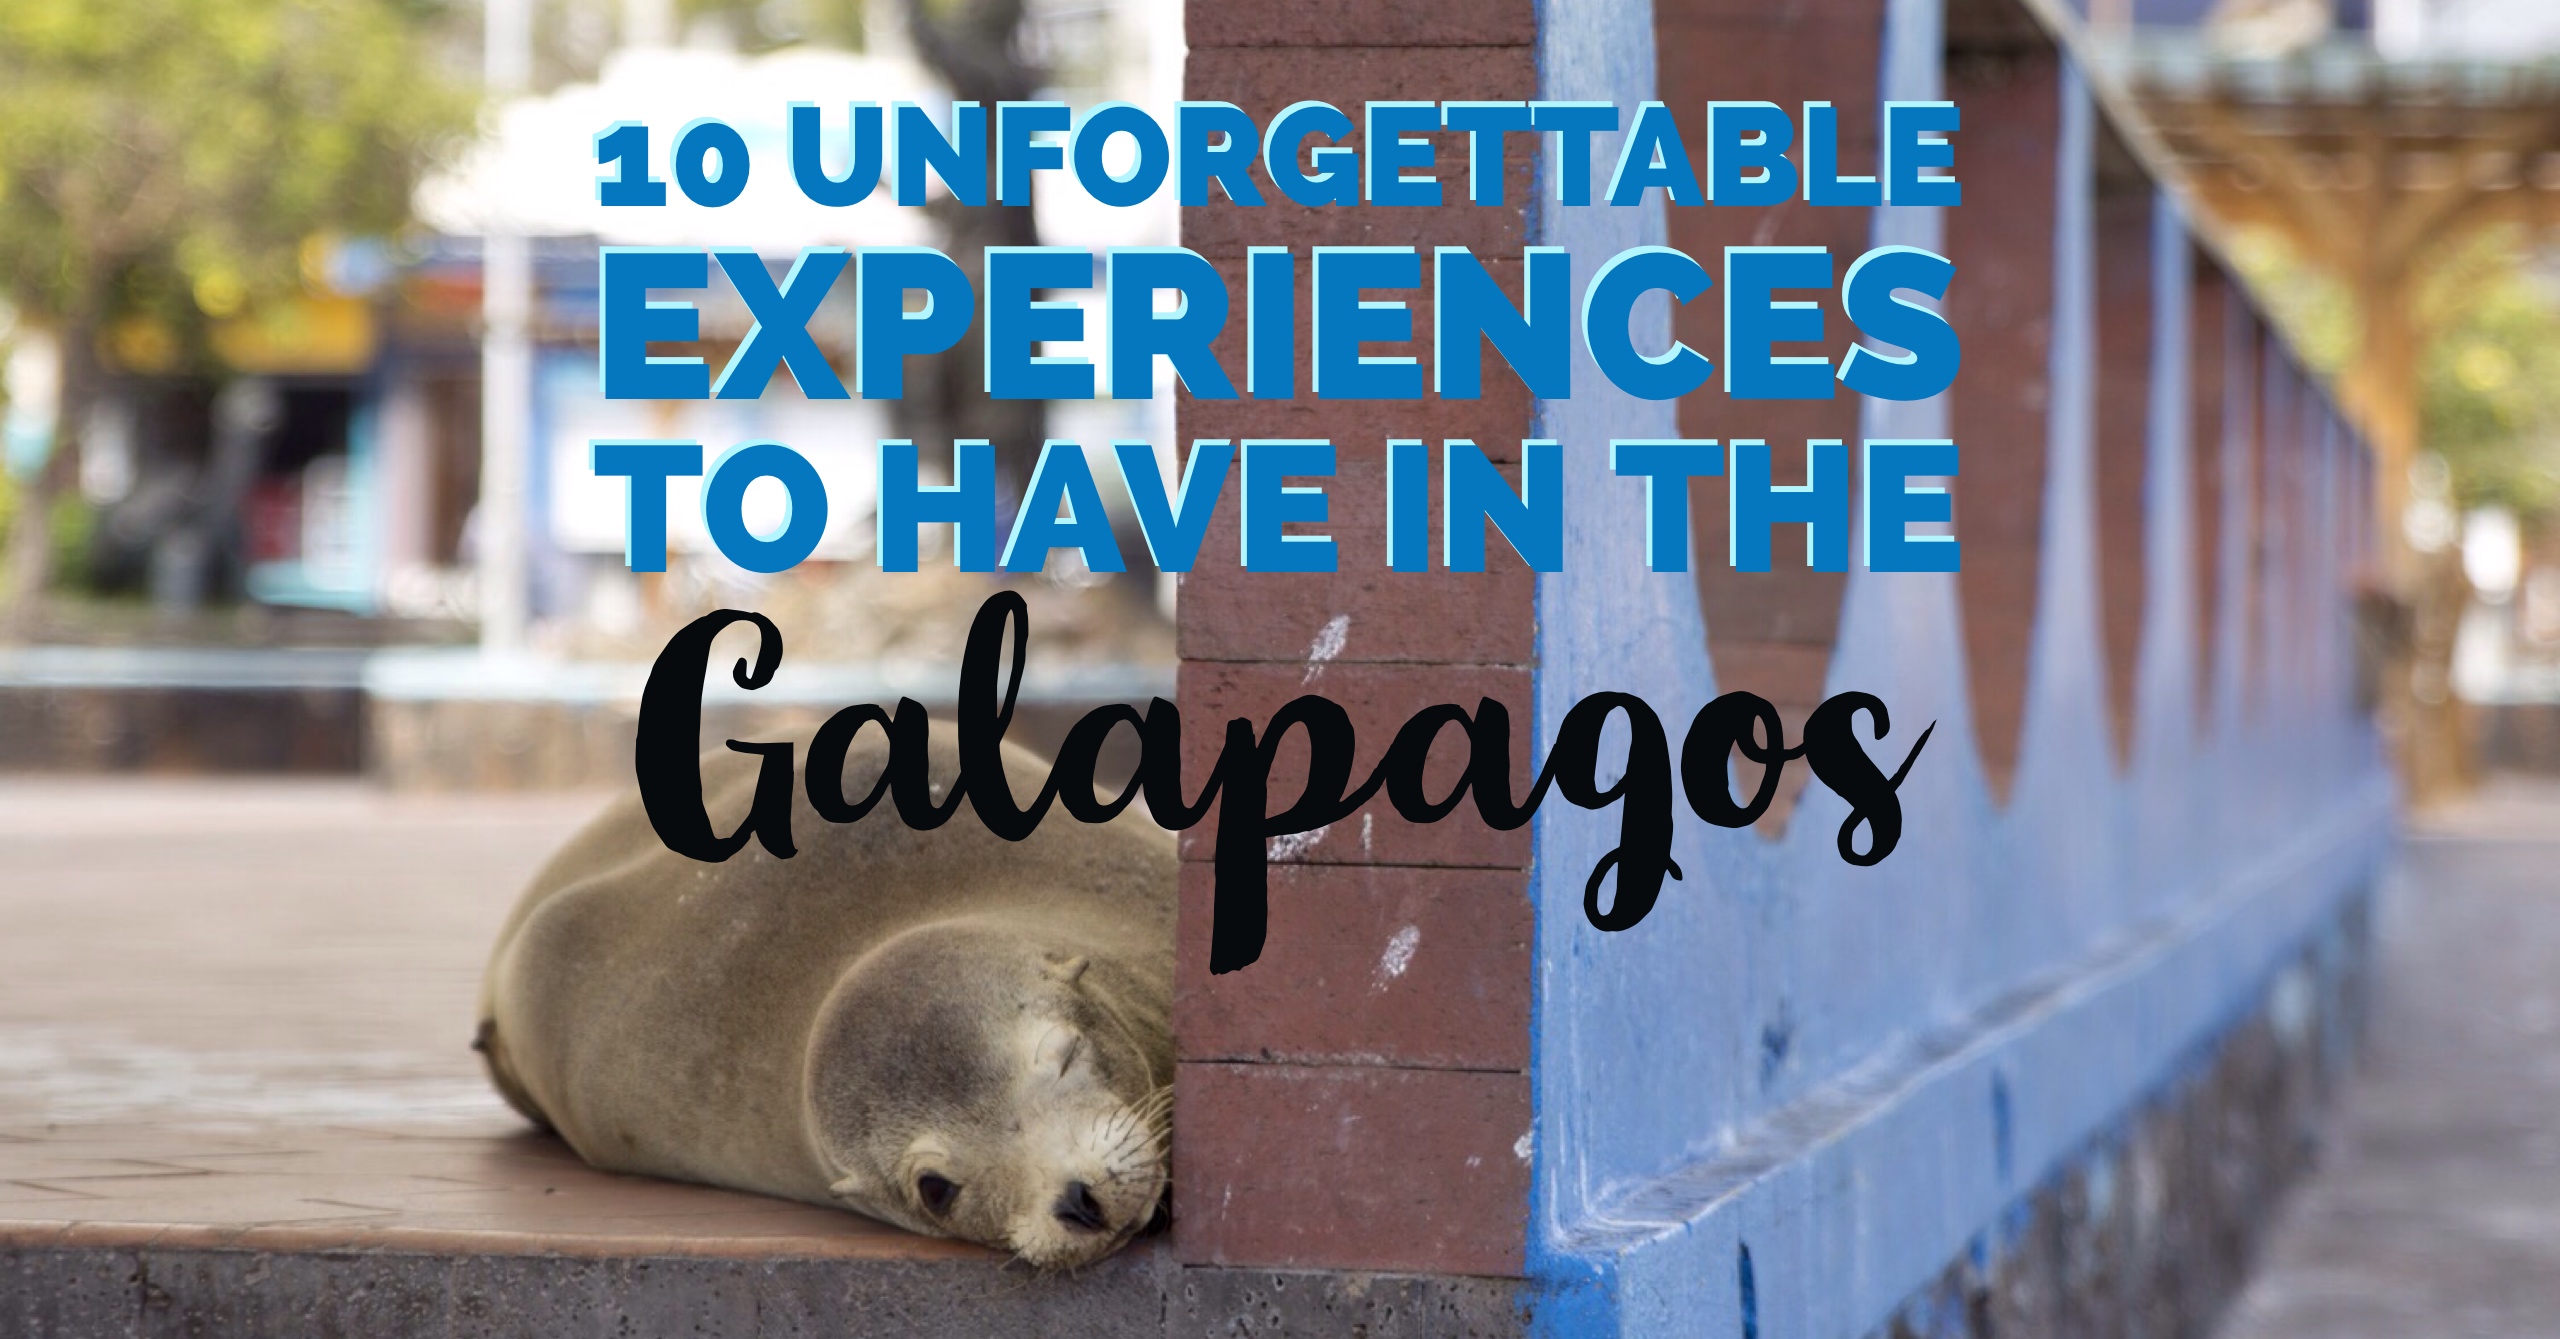 10 unforgettable experiences to have in Galapagos | My Wandering Voyage travel blog